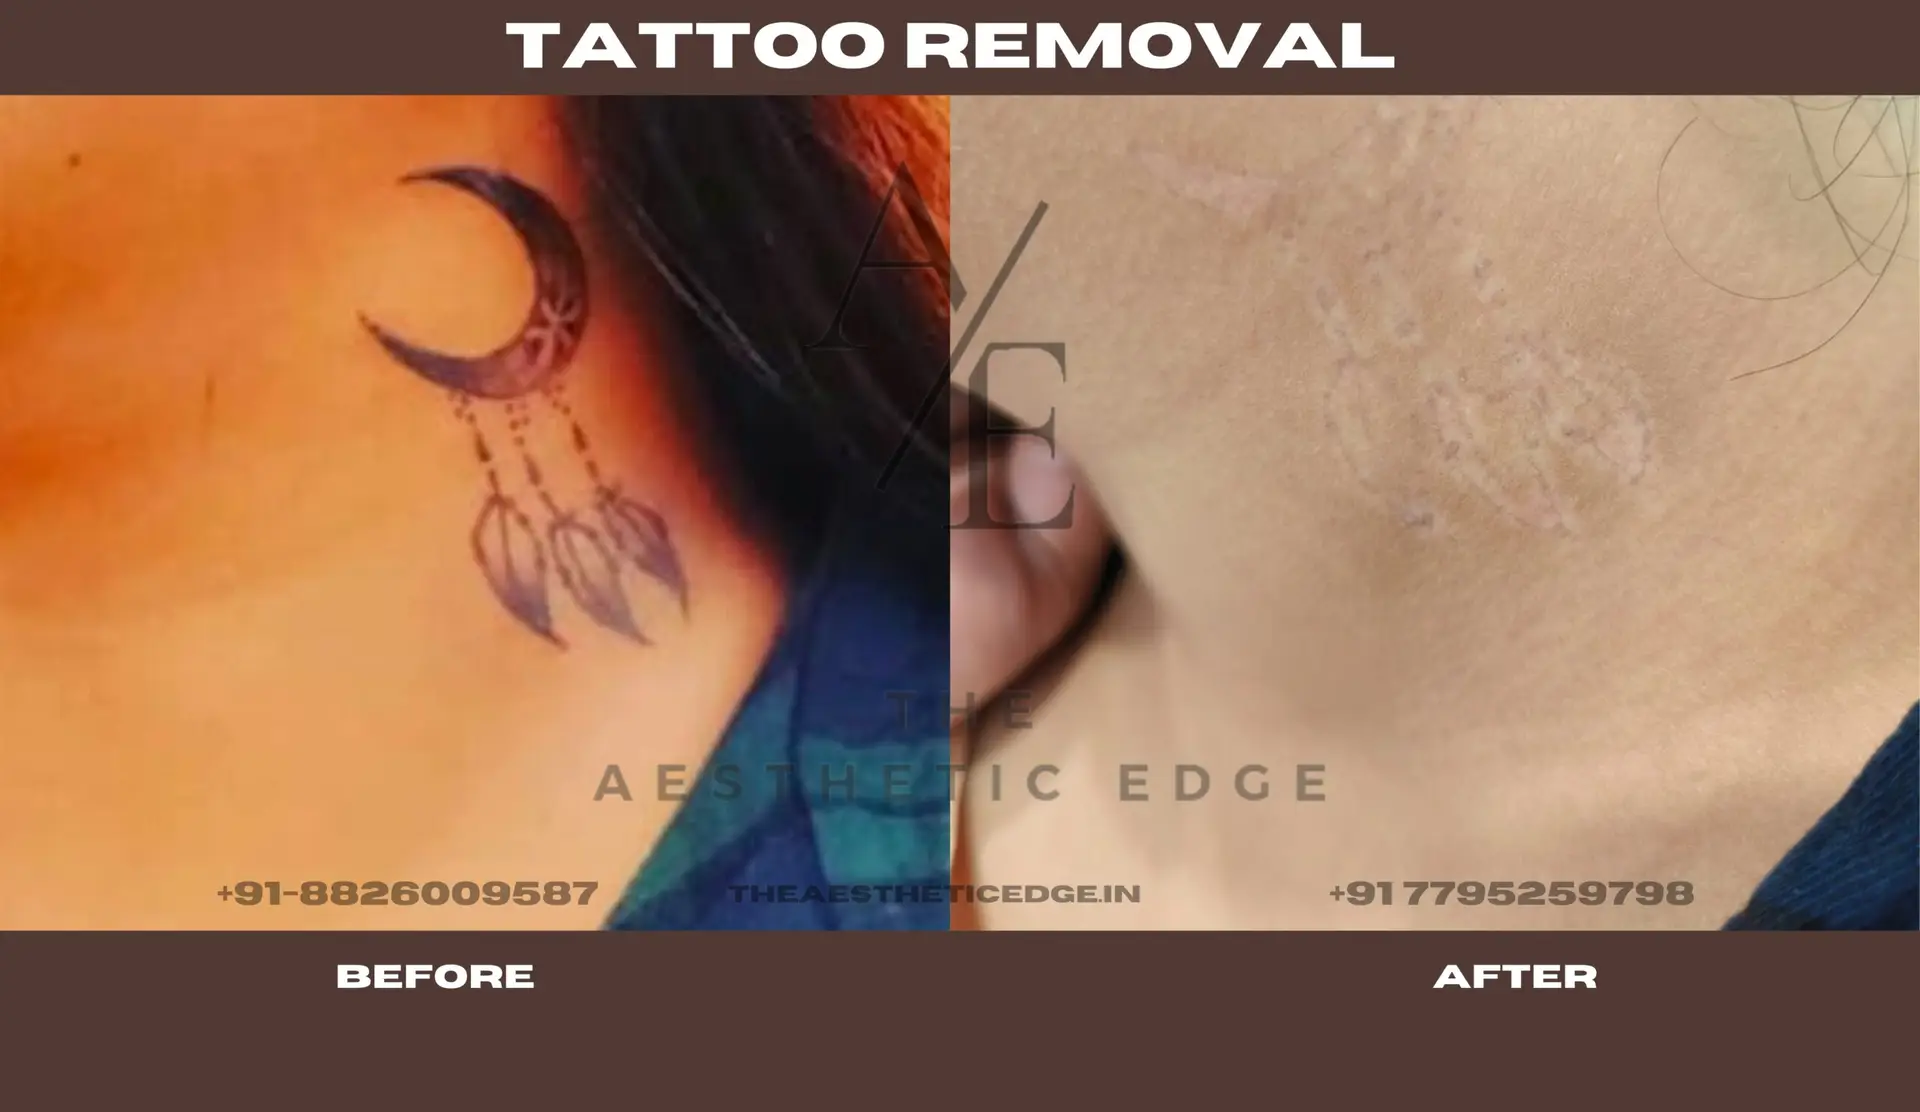 Tattoo removal results